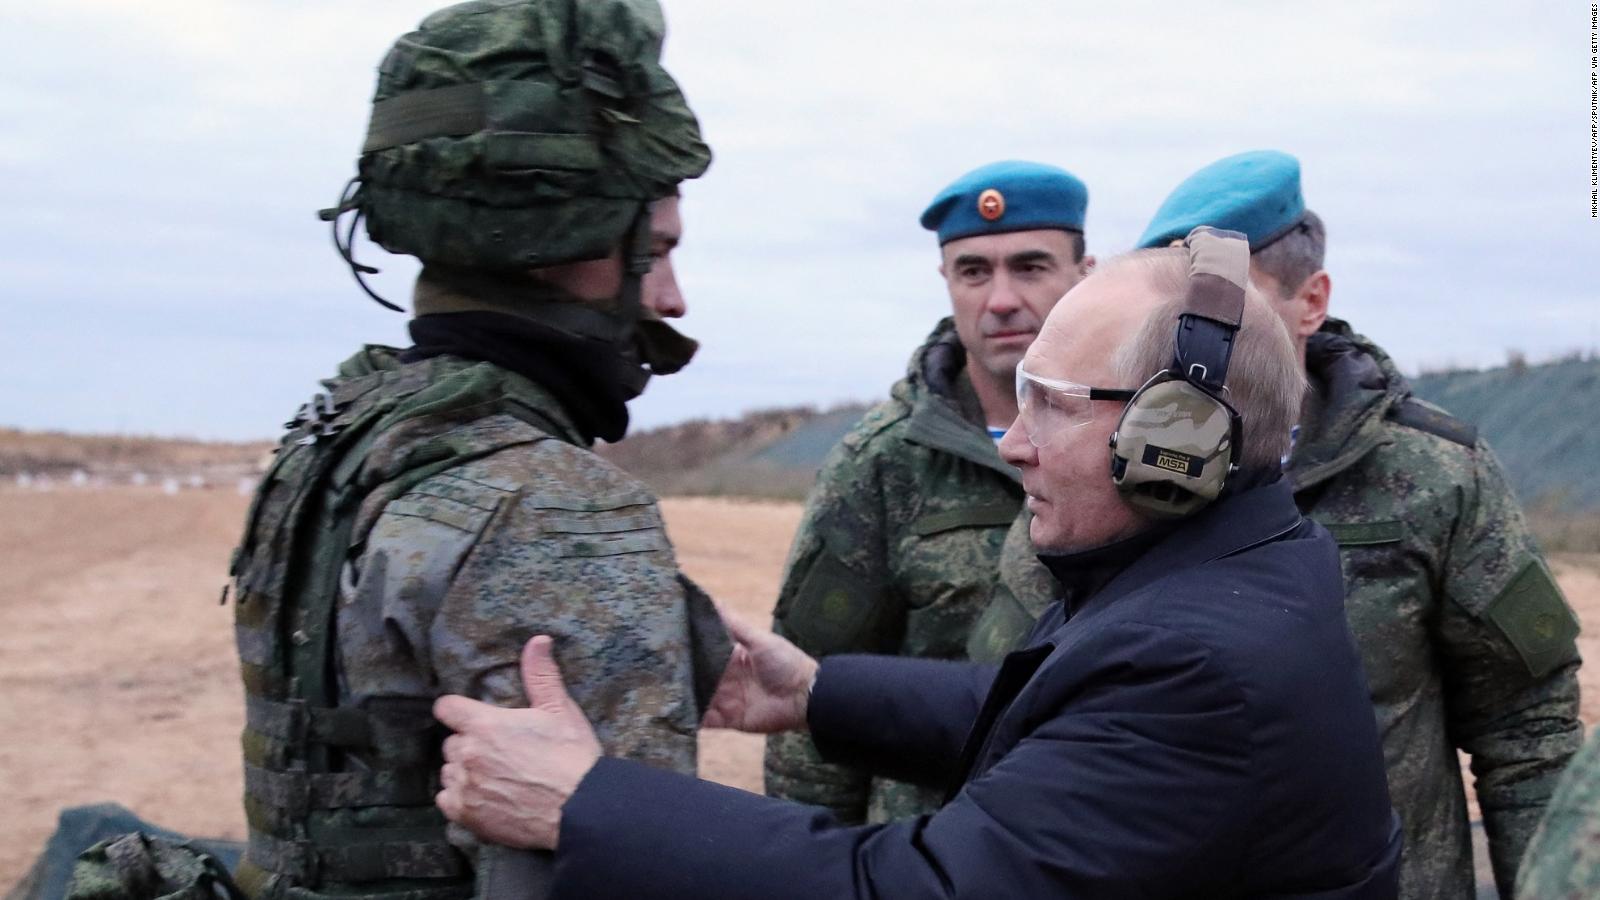 This is what Putin does to soldiers who refuse to fight